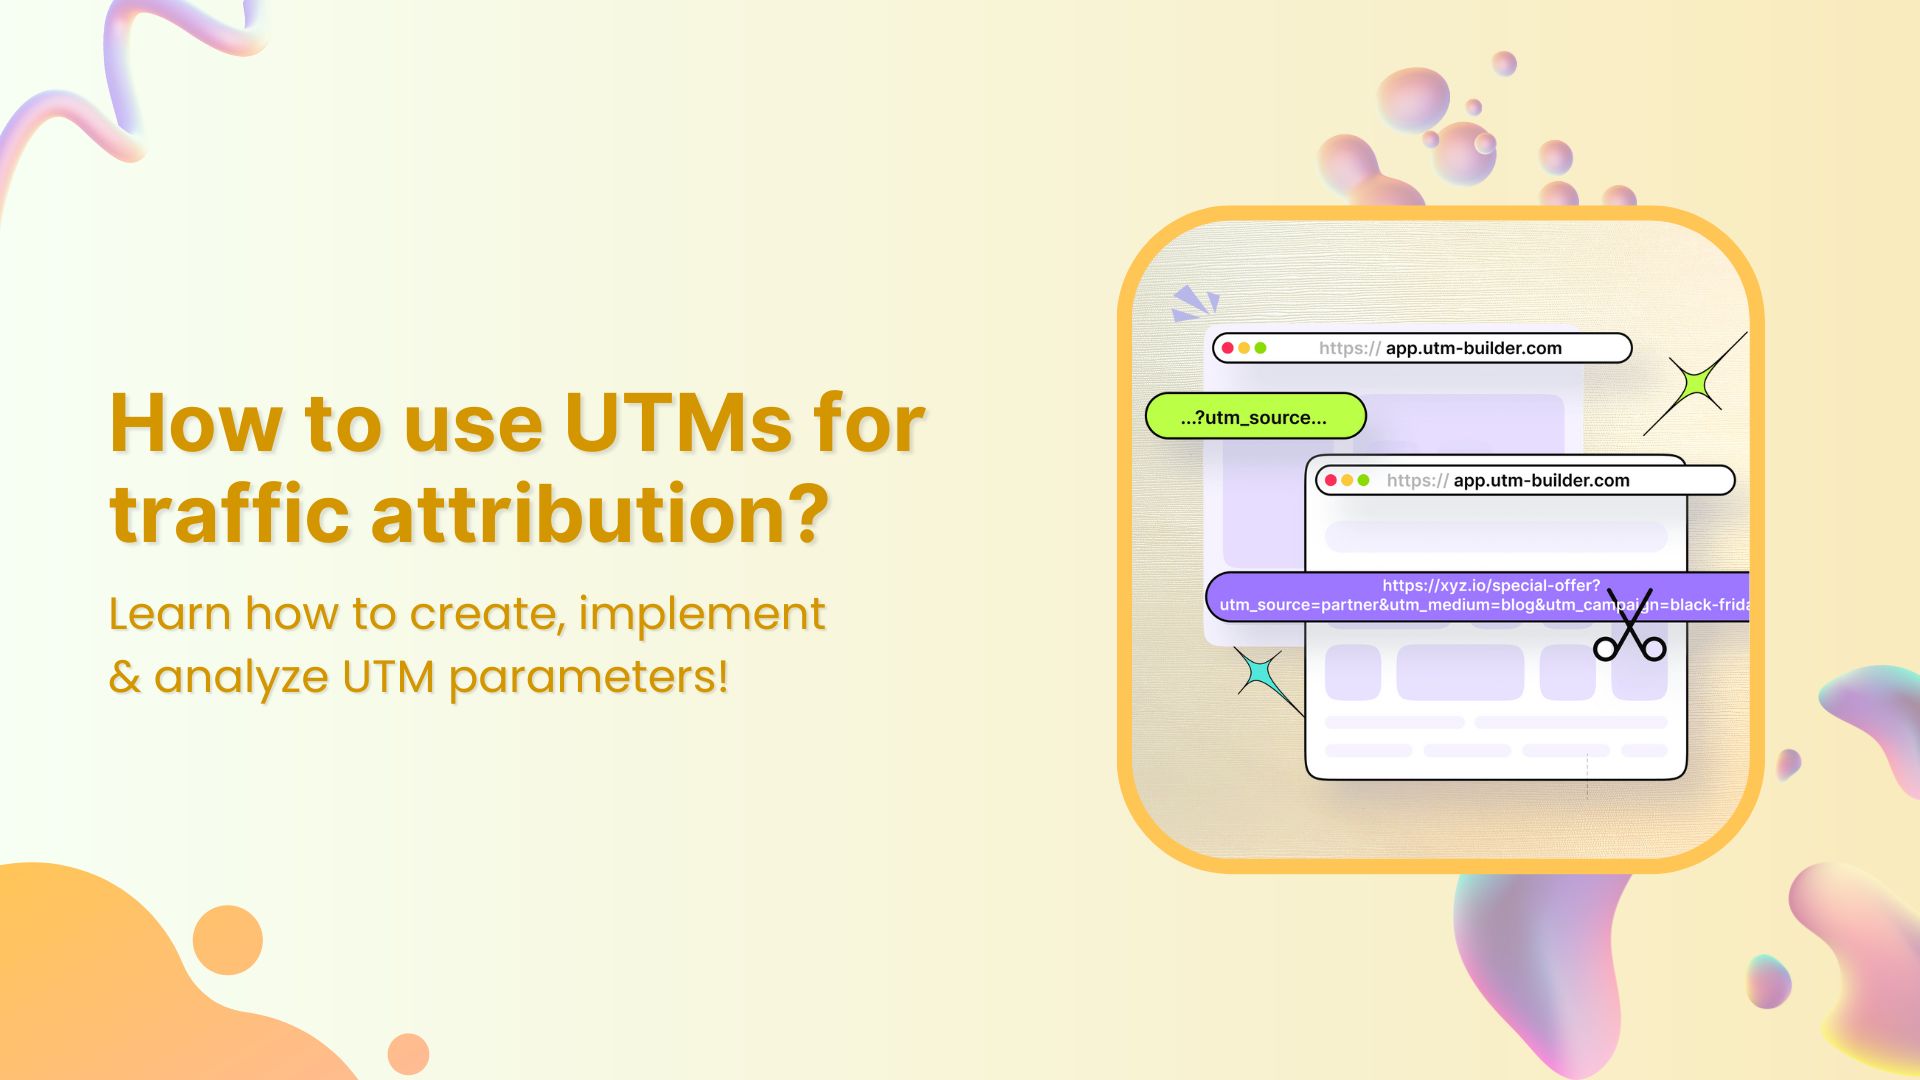 How to use UTM parameters for traffic attribution?